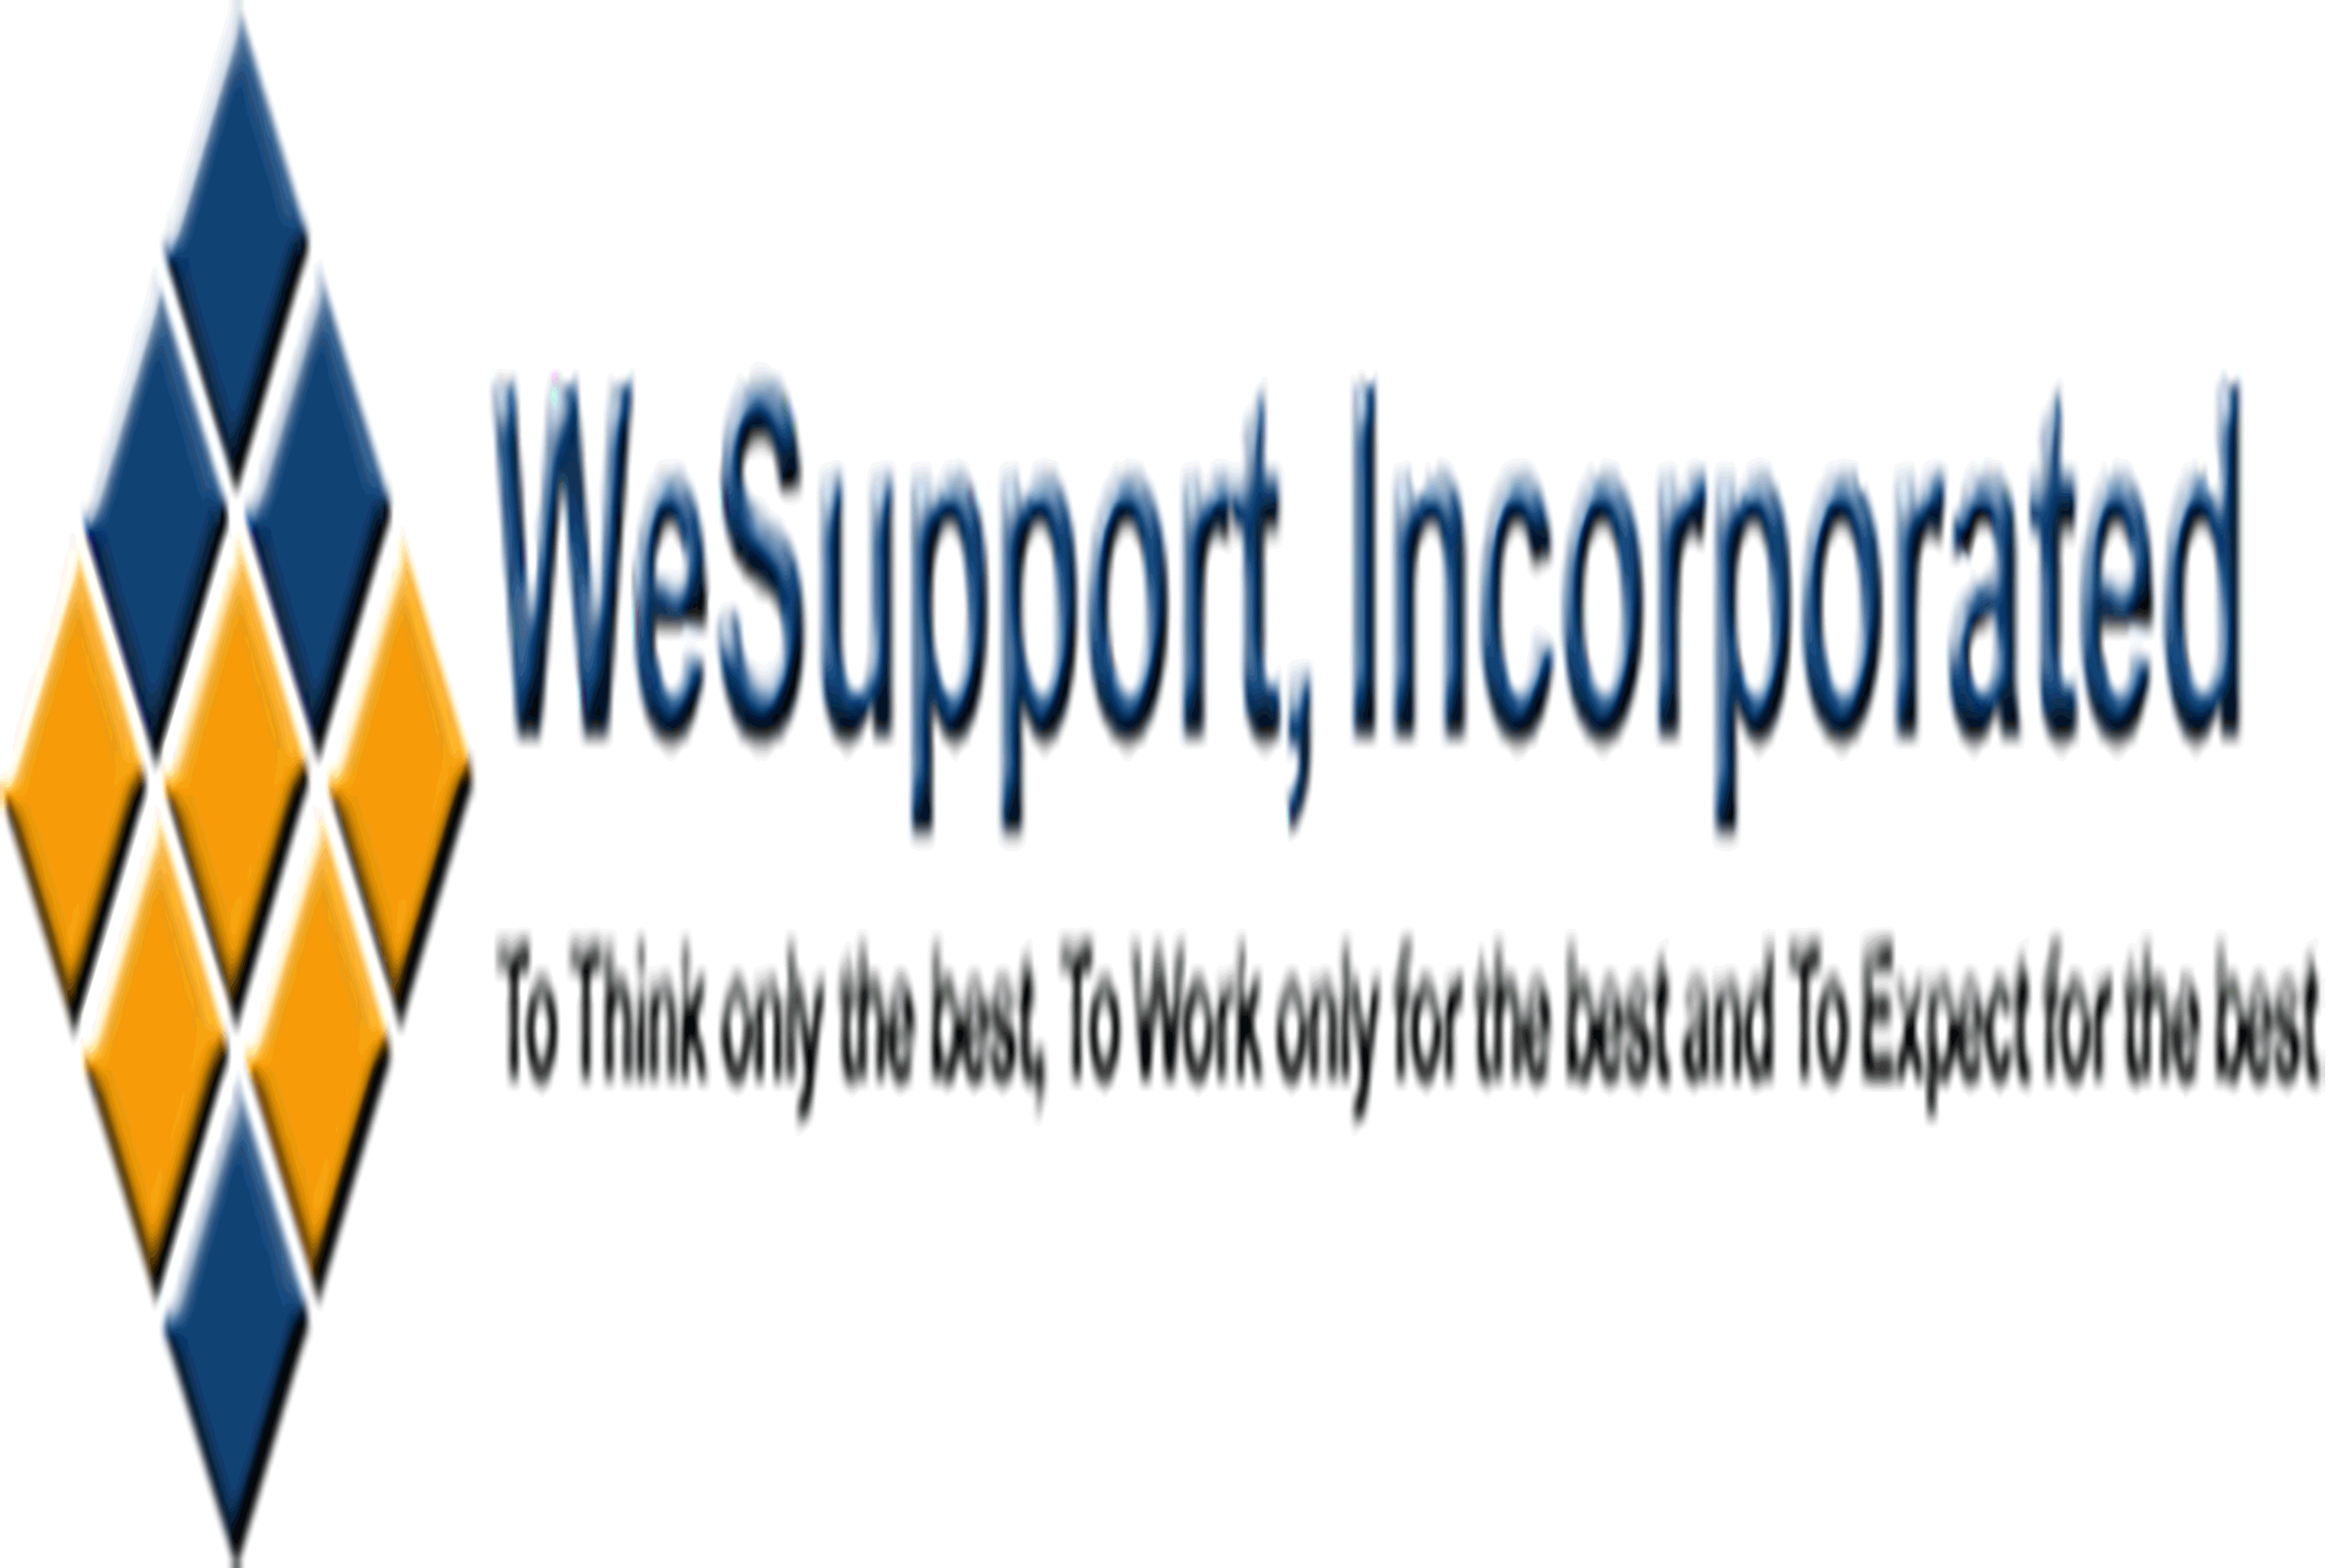 WeSupport Incorporated